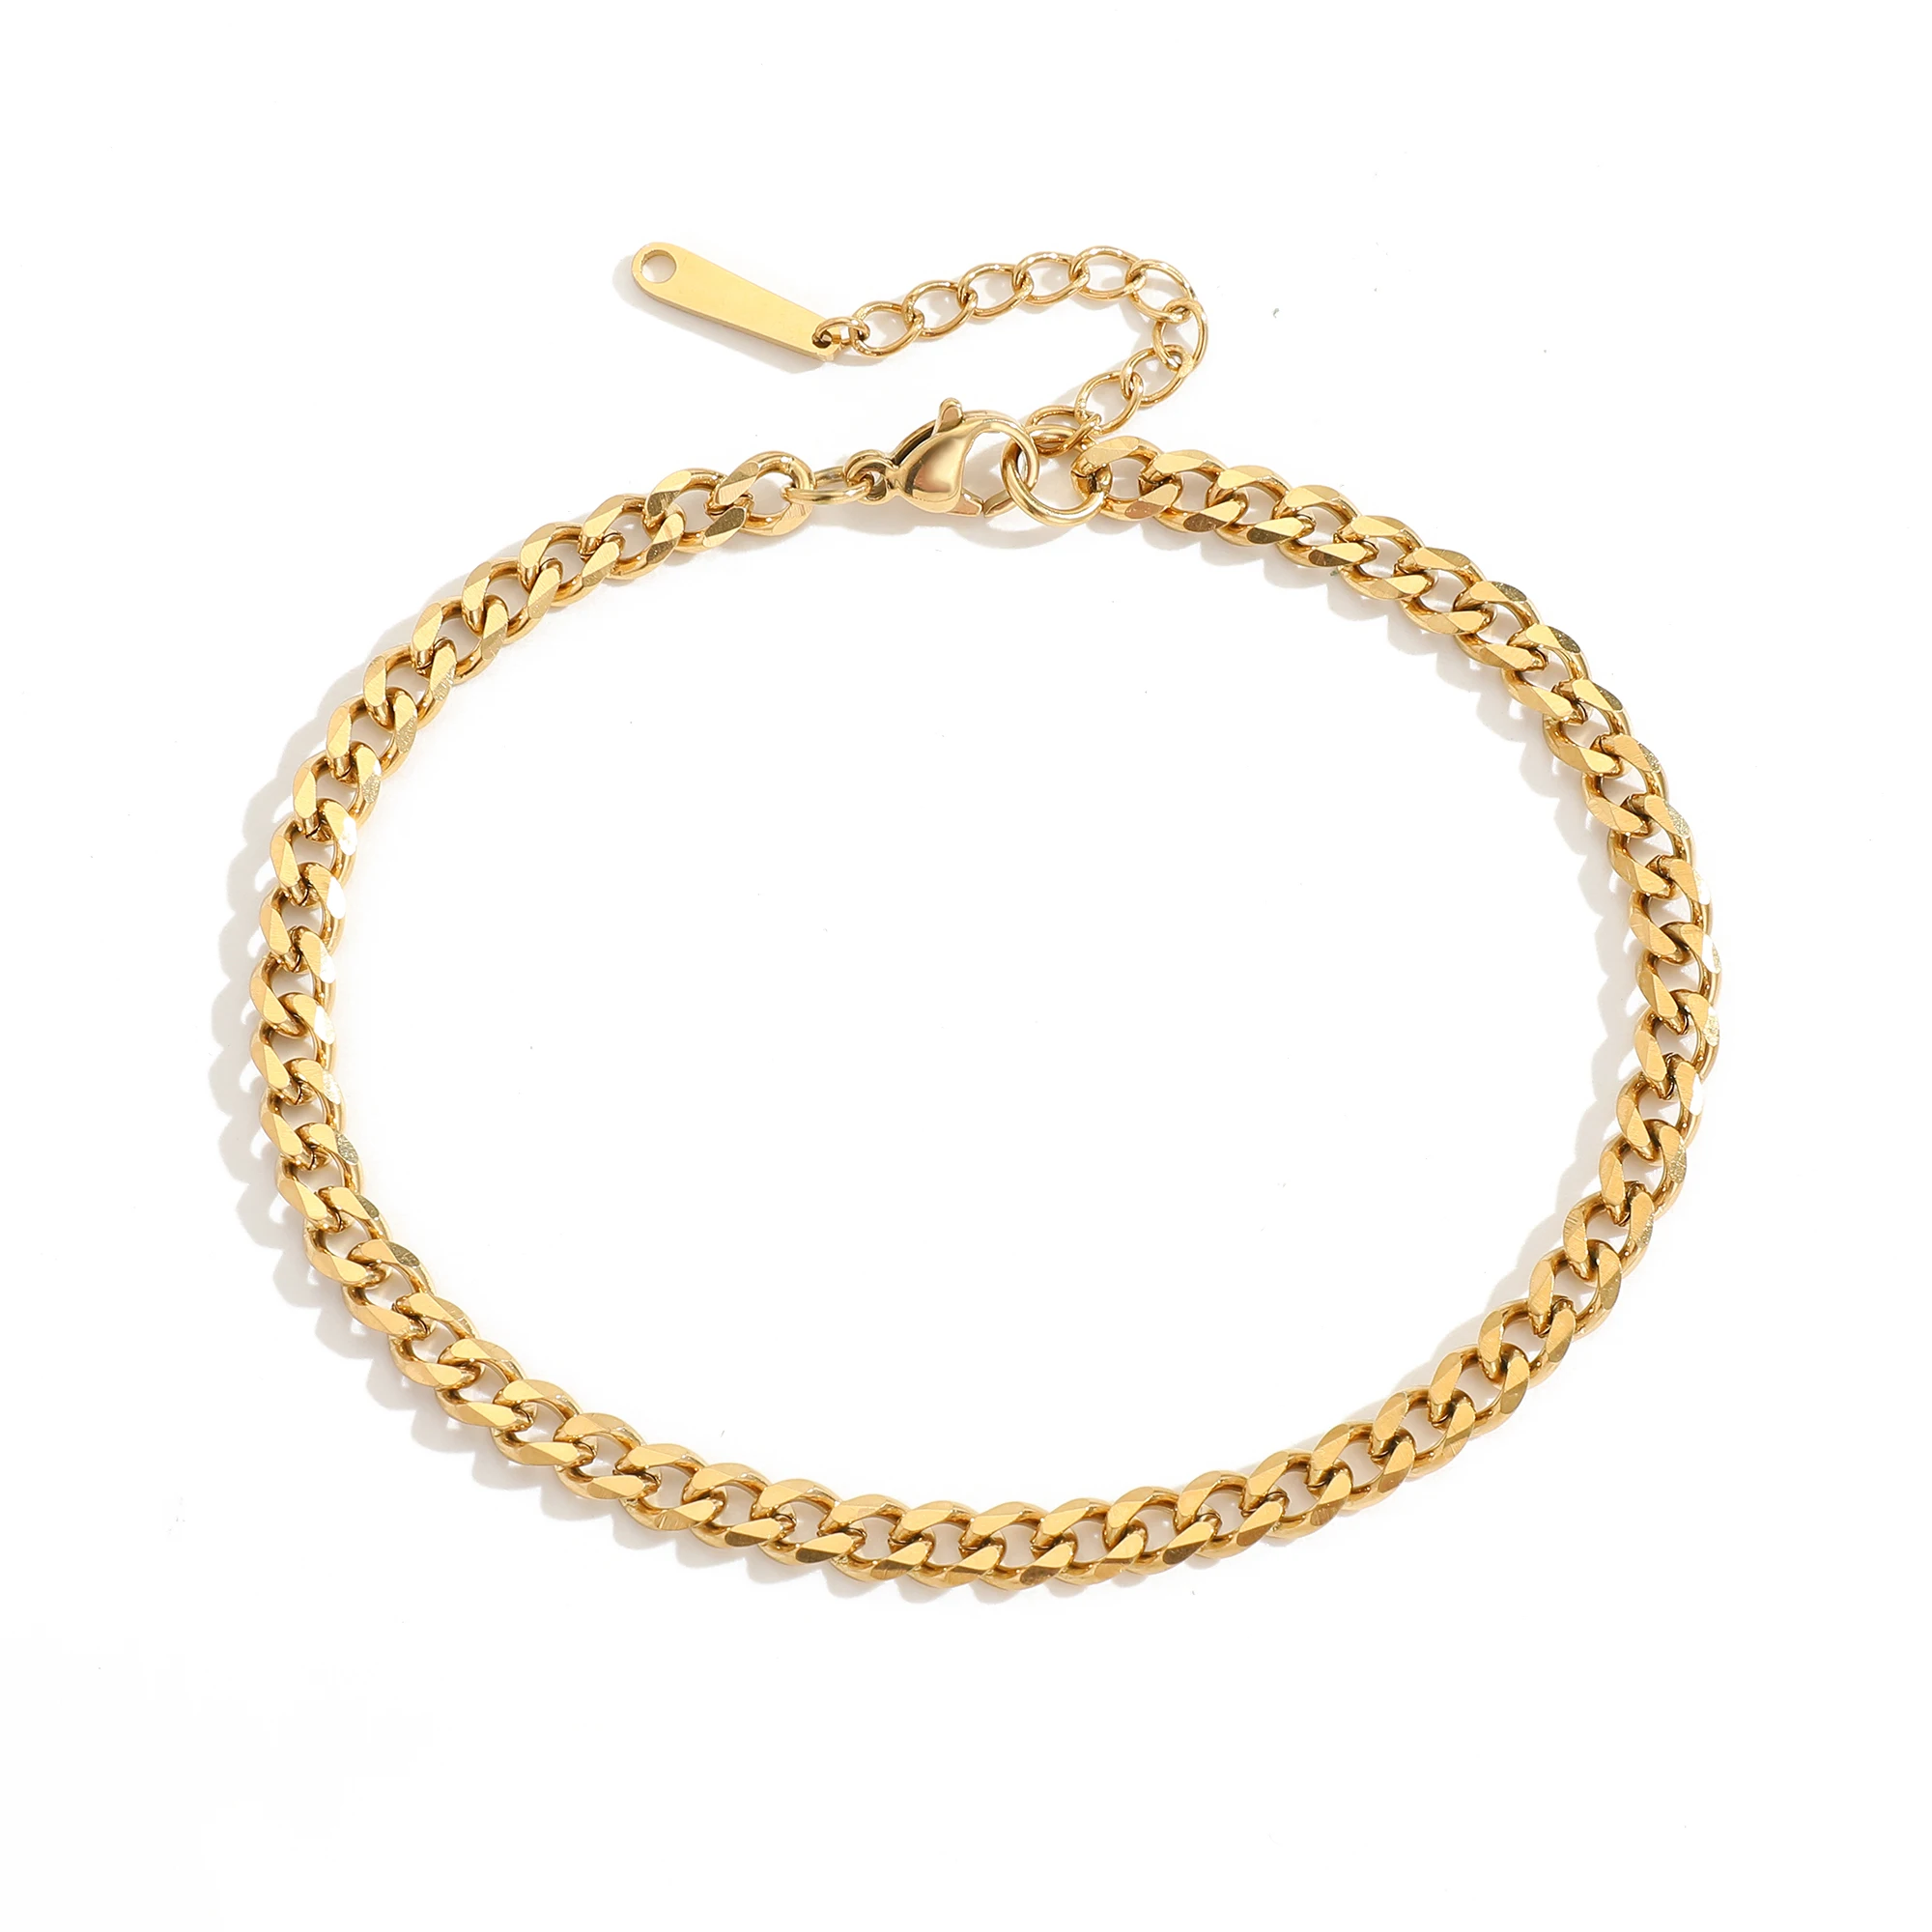 

eManco 4MM Cuban Chain Anklet Foot Jewelry 316L Stainless Steel Gold Plated Adjustable Chain Women Men Wholesale